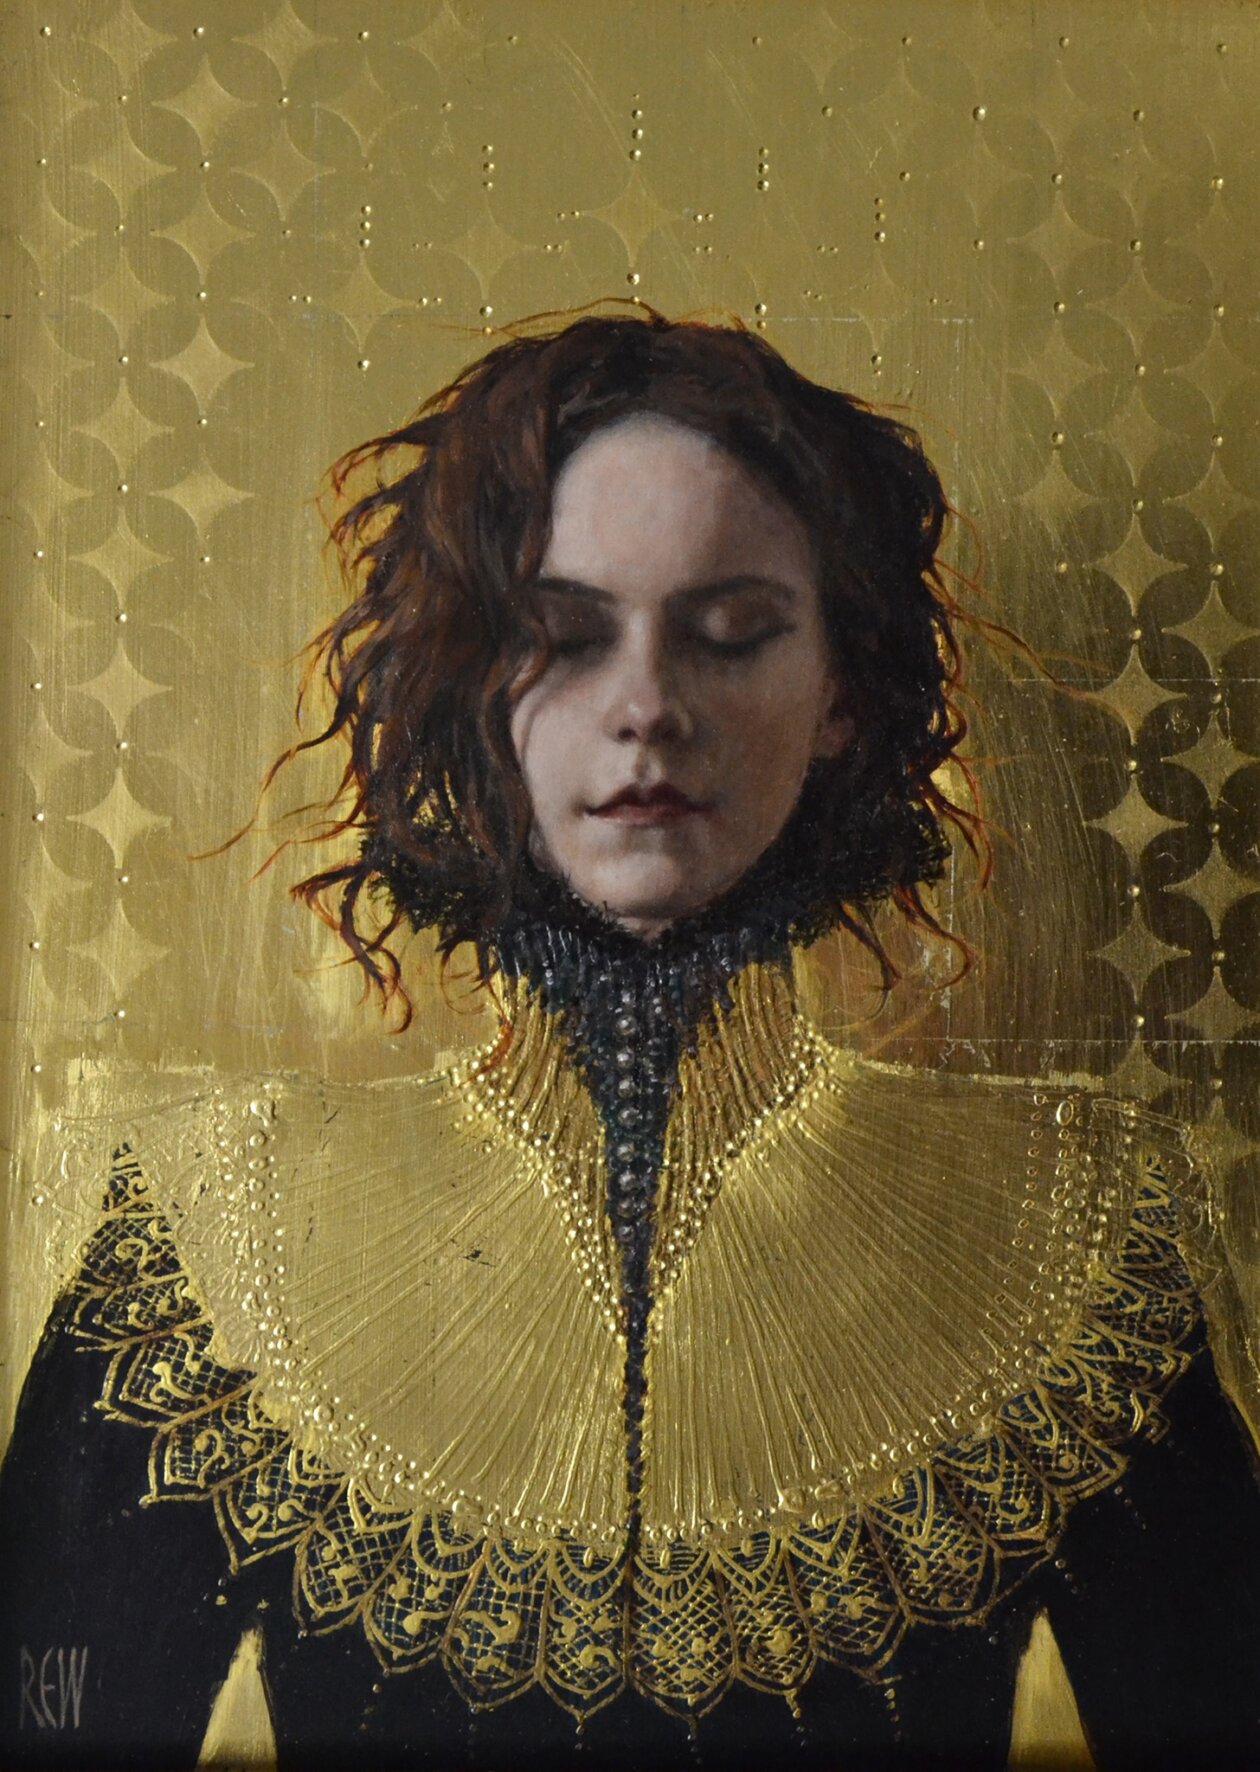 Realistic Figurative Paintings With Gold Ornaments By Stephanie Rew (11)